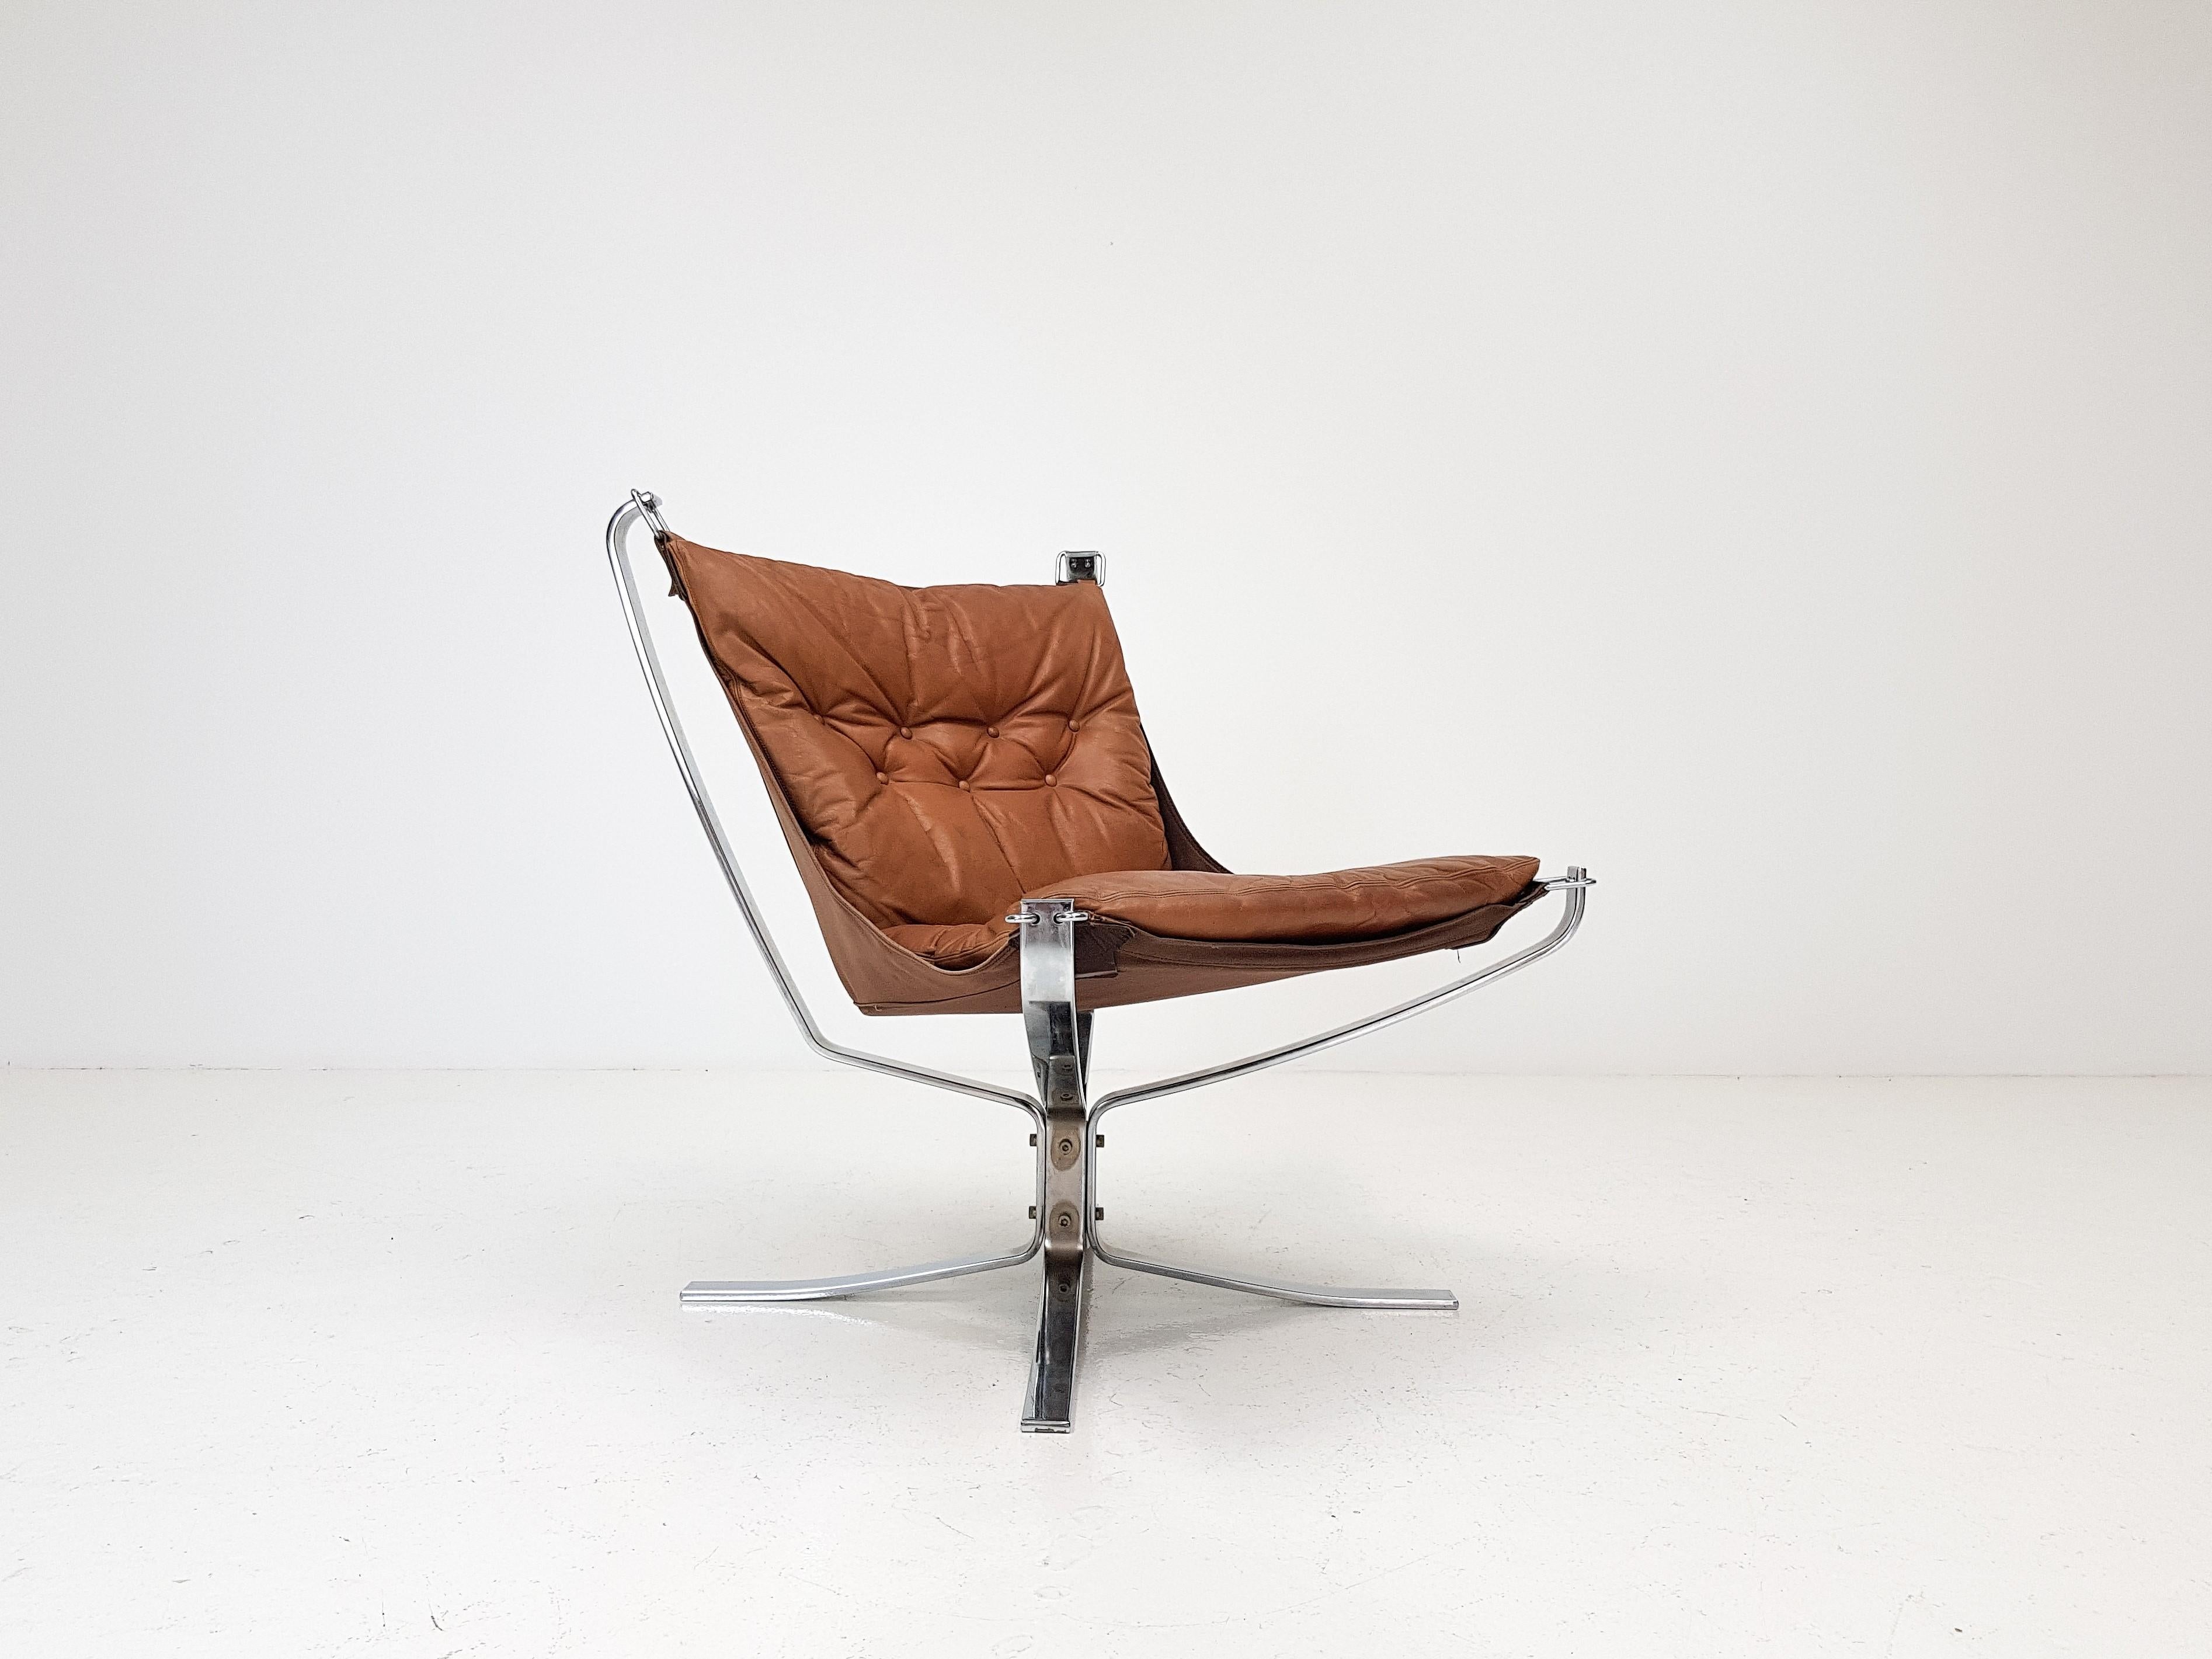 Iconic vintage low-backed X framed Sigurd Ressell designed, 1970s Falcon chair on chrome-plated steel base with cognac leather.

A super comfortable, amazing looking, 1970s Sigurd Ressell designed iconic Falcon chair. X framed with hammock design.